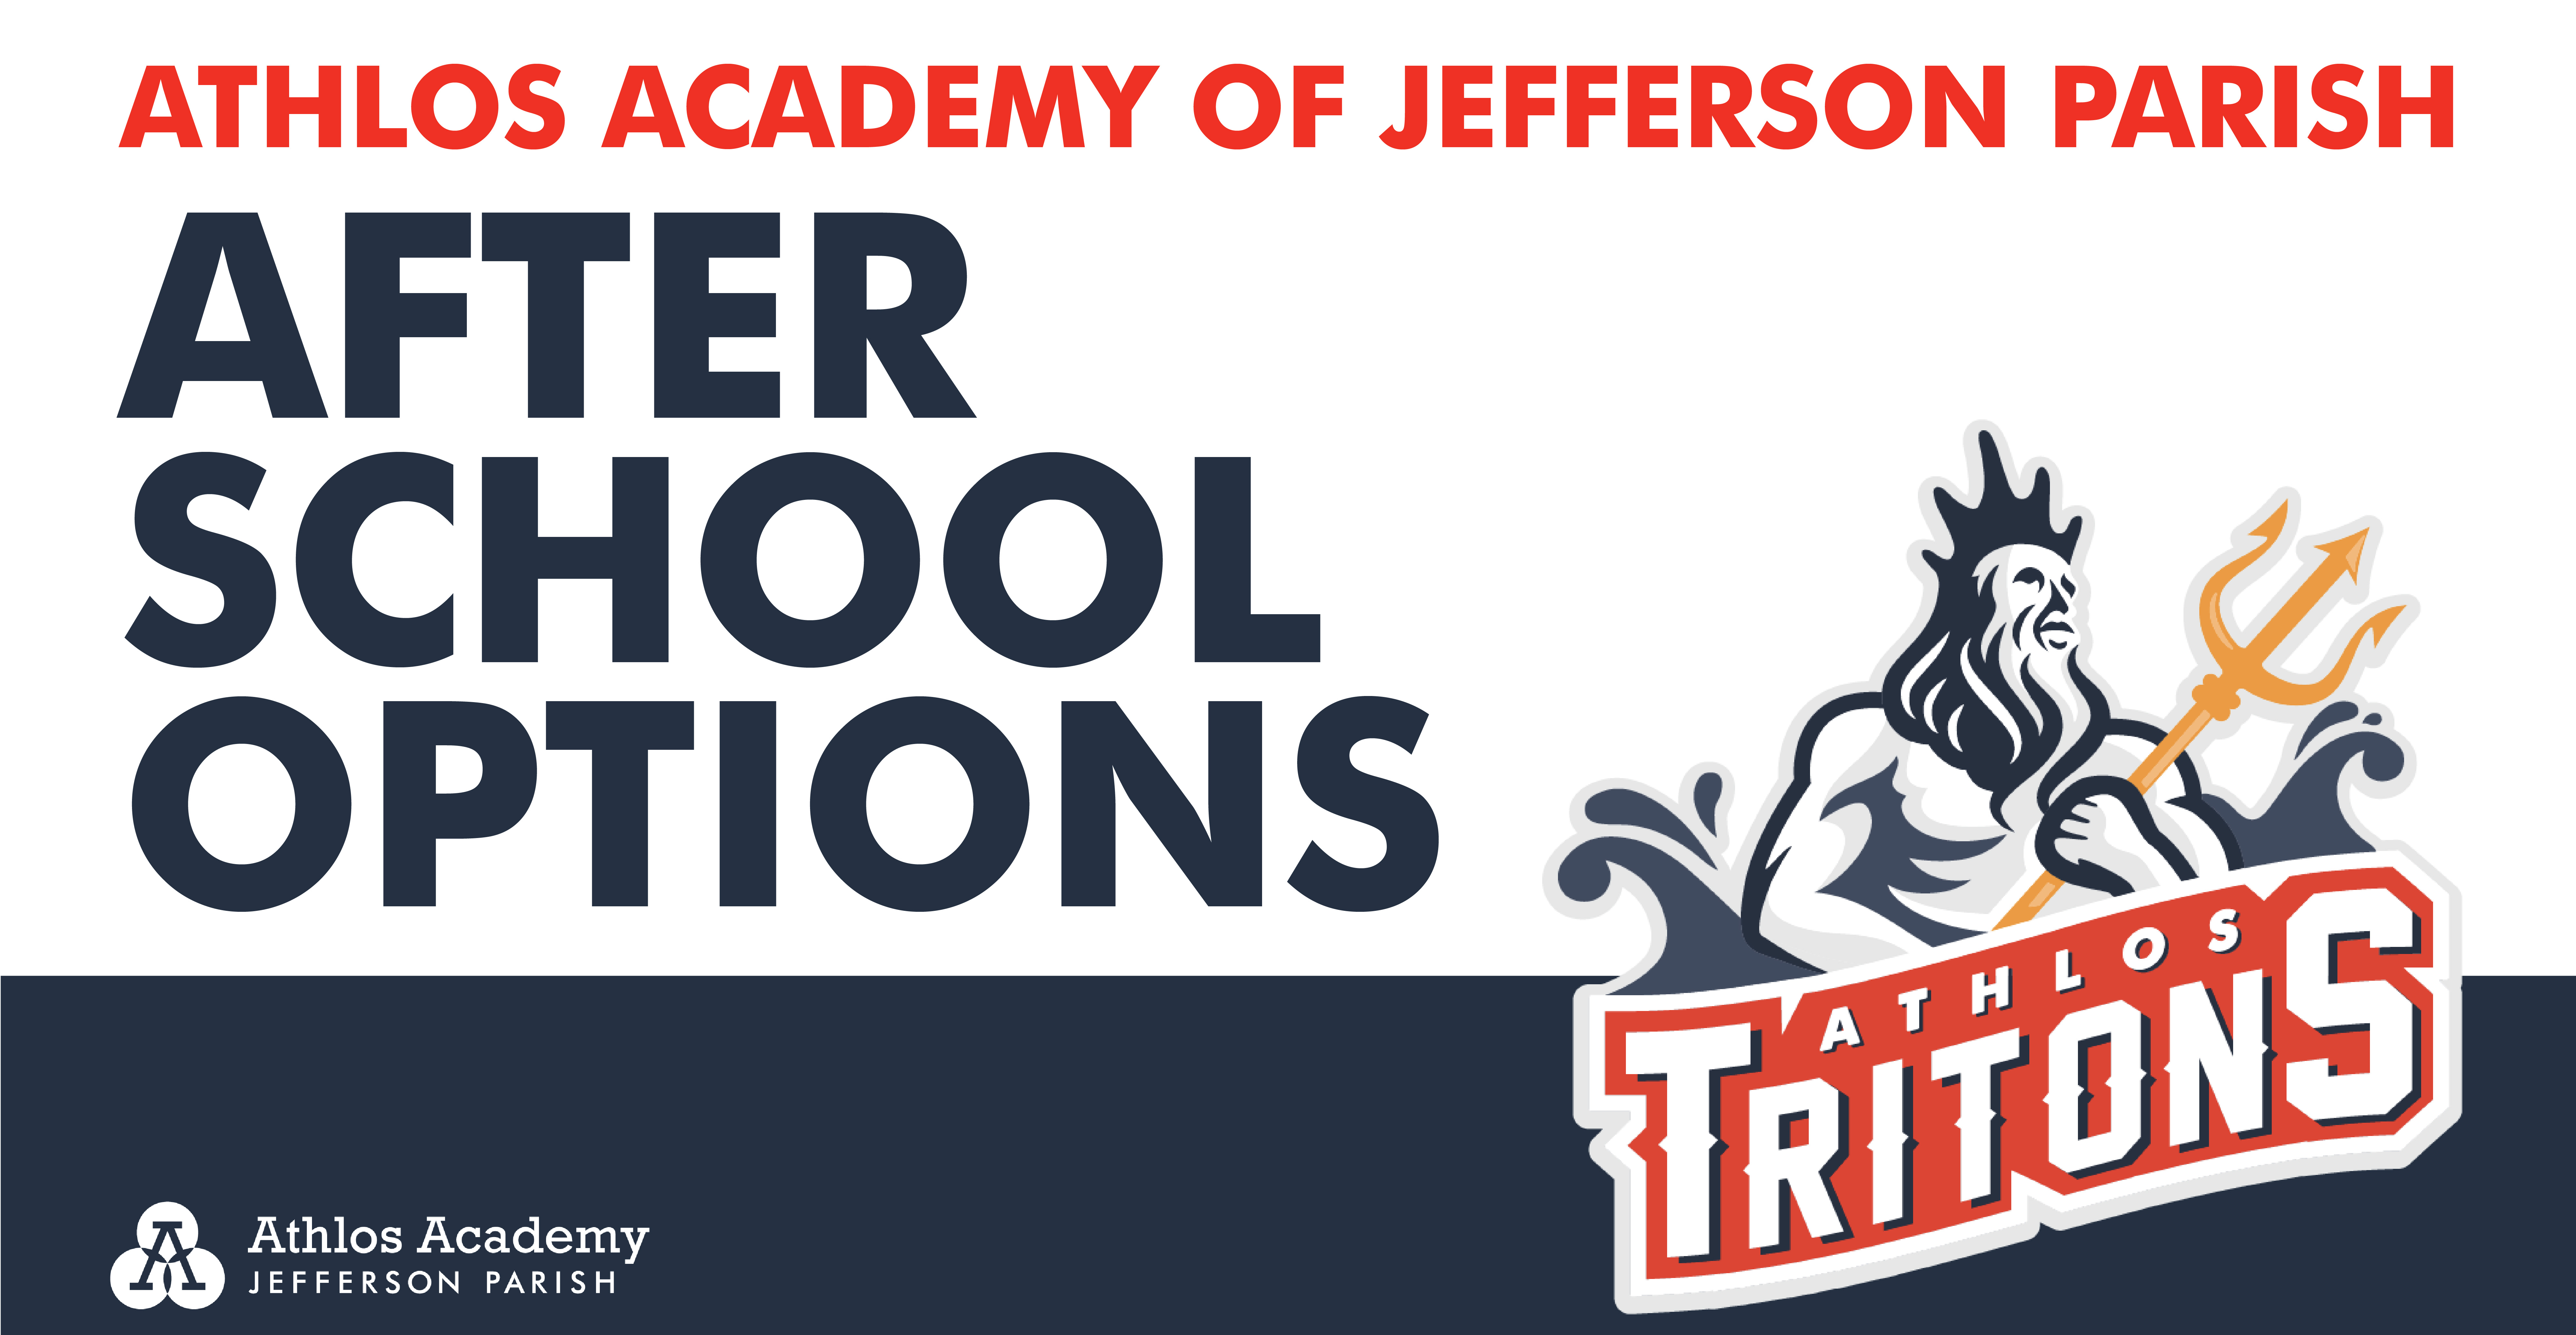 image saying after school options with triton logo